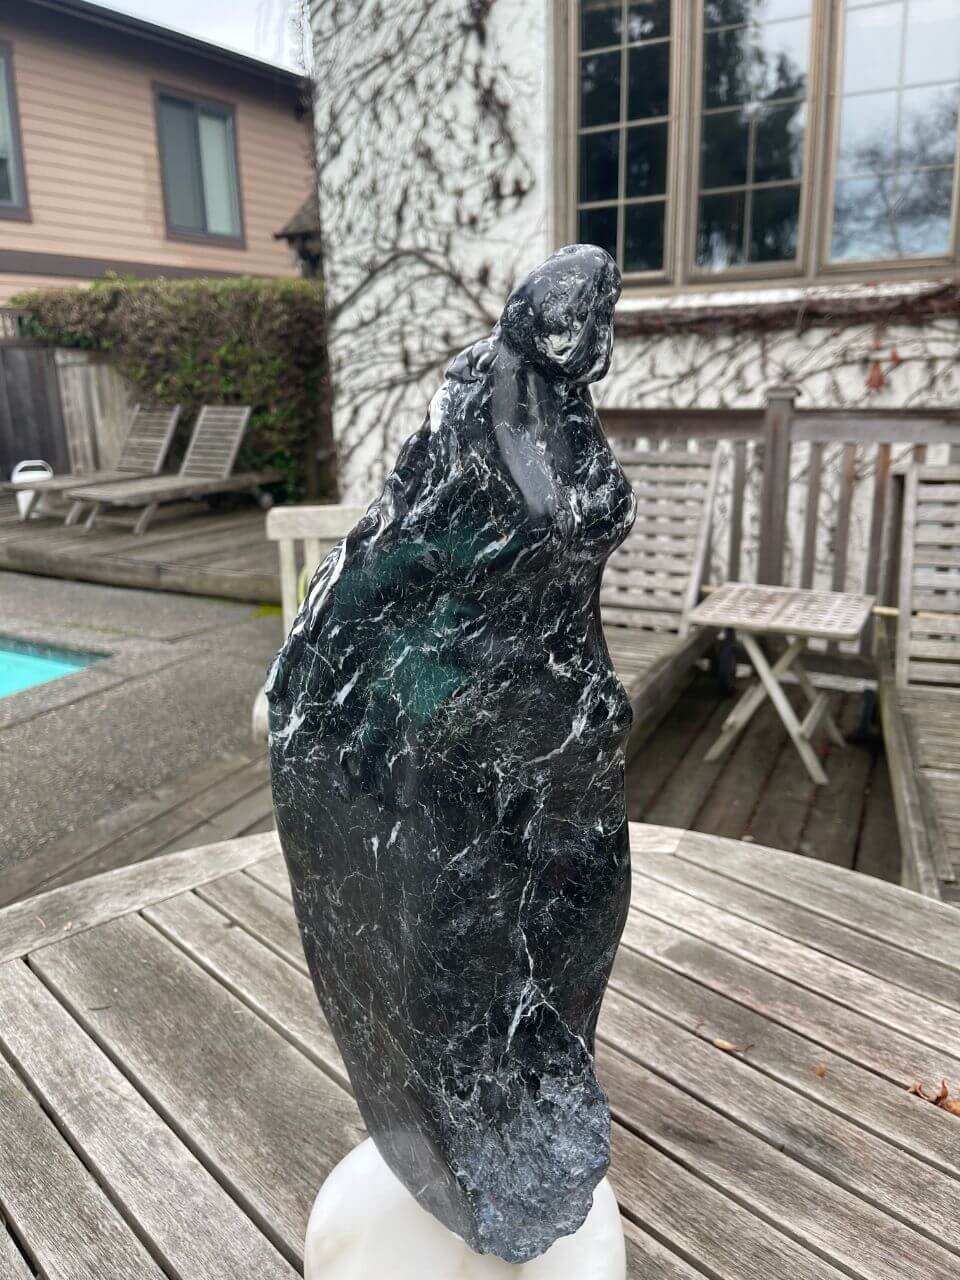 Black marble figure of a shawl clad lady, a potential bowspirit if it weren't’ made of stone